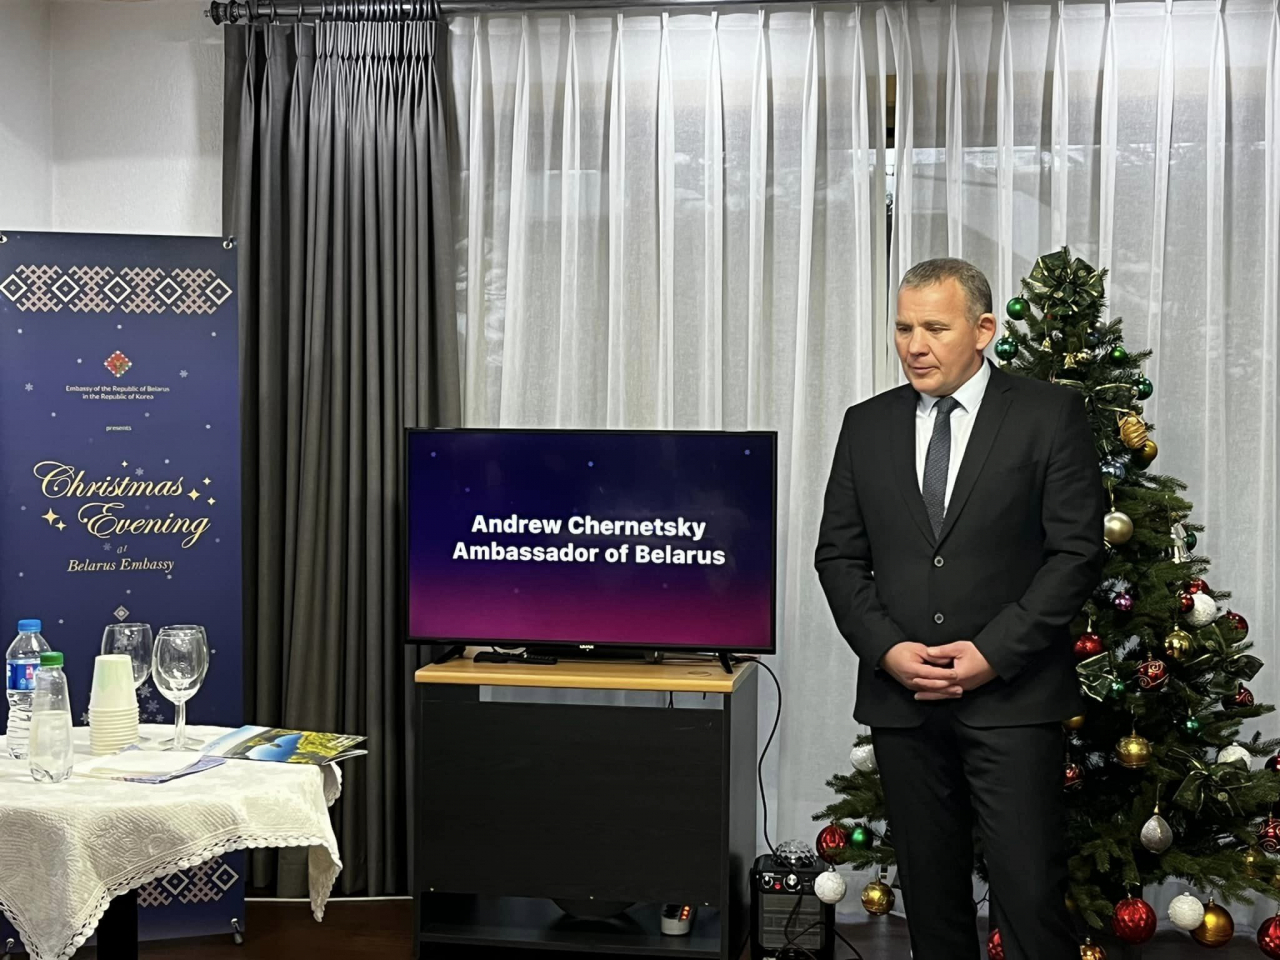 Belarusian Ambassador to Korea Andrew Chernetsky delivers remarks during orthodox Christmas celebrations at Embassy of Belarus in Yongsan-gu, Seoul on Friday. (Belarusian Embassy in Seoul)